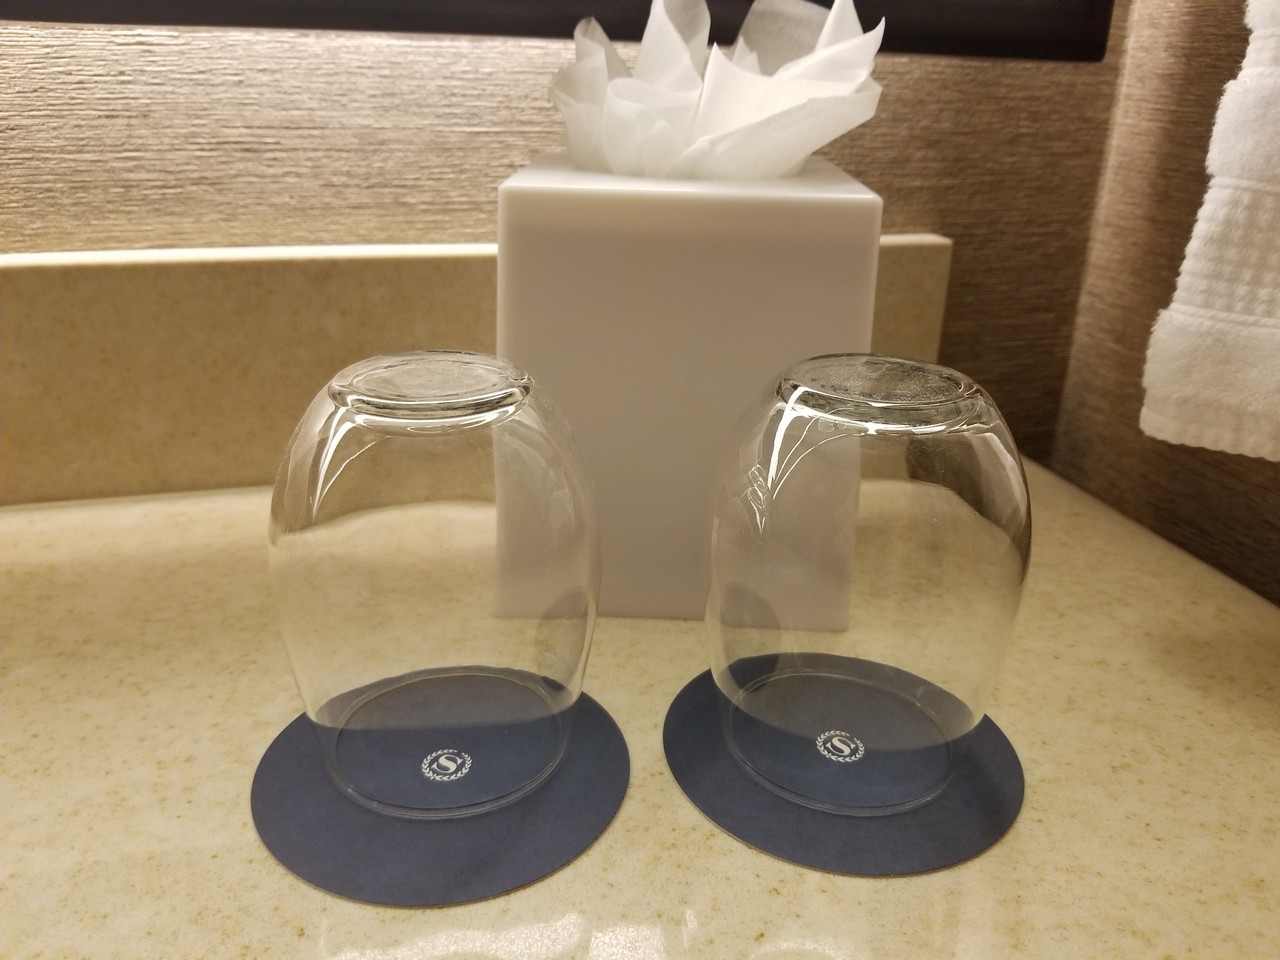 two glasses on a table